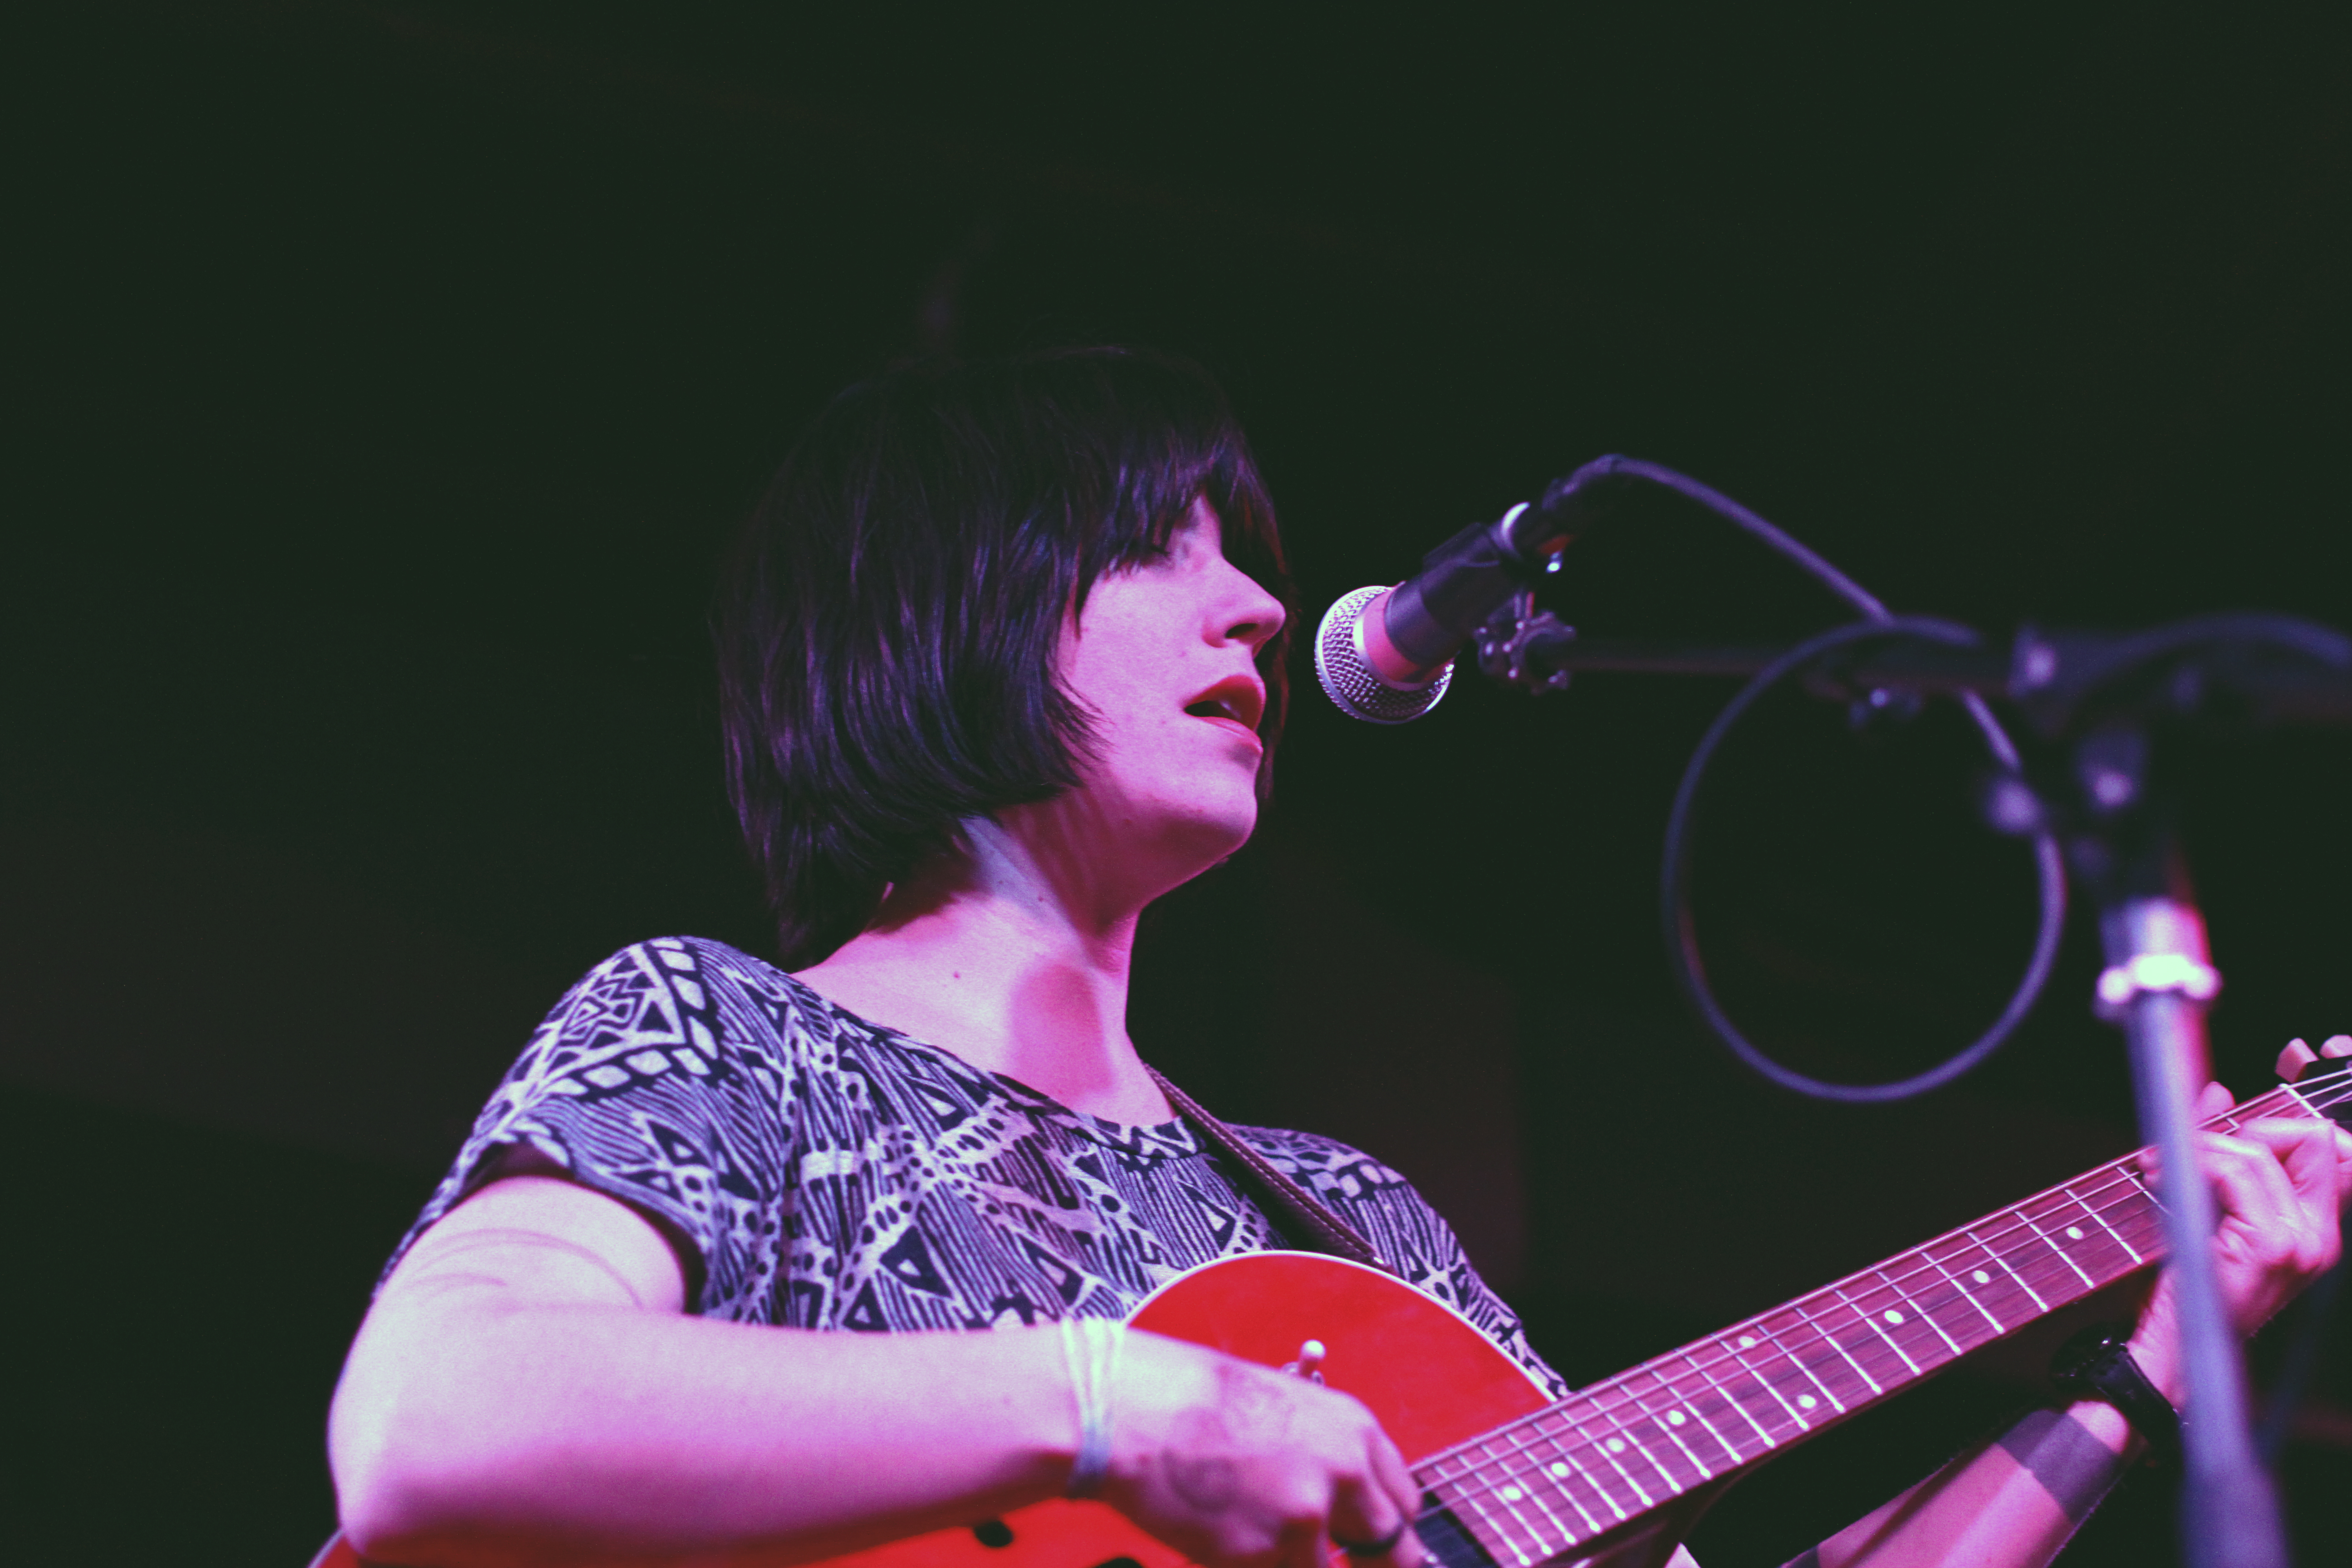 Sharon Van Etten performs at The Red Palace in Washington, D.C. on Apr. 17, 2011. (© Michael Katzif – Do not use or republish without prior consent.)